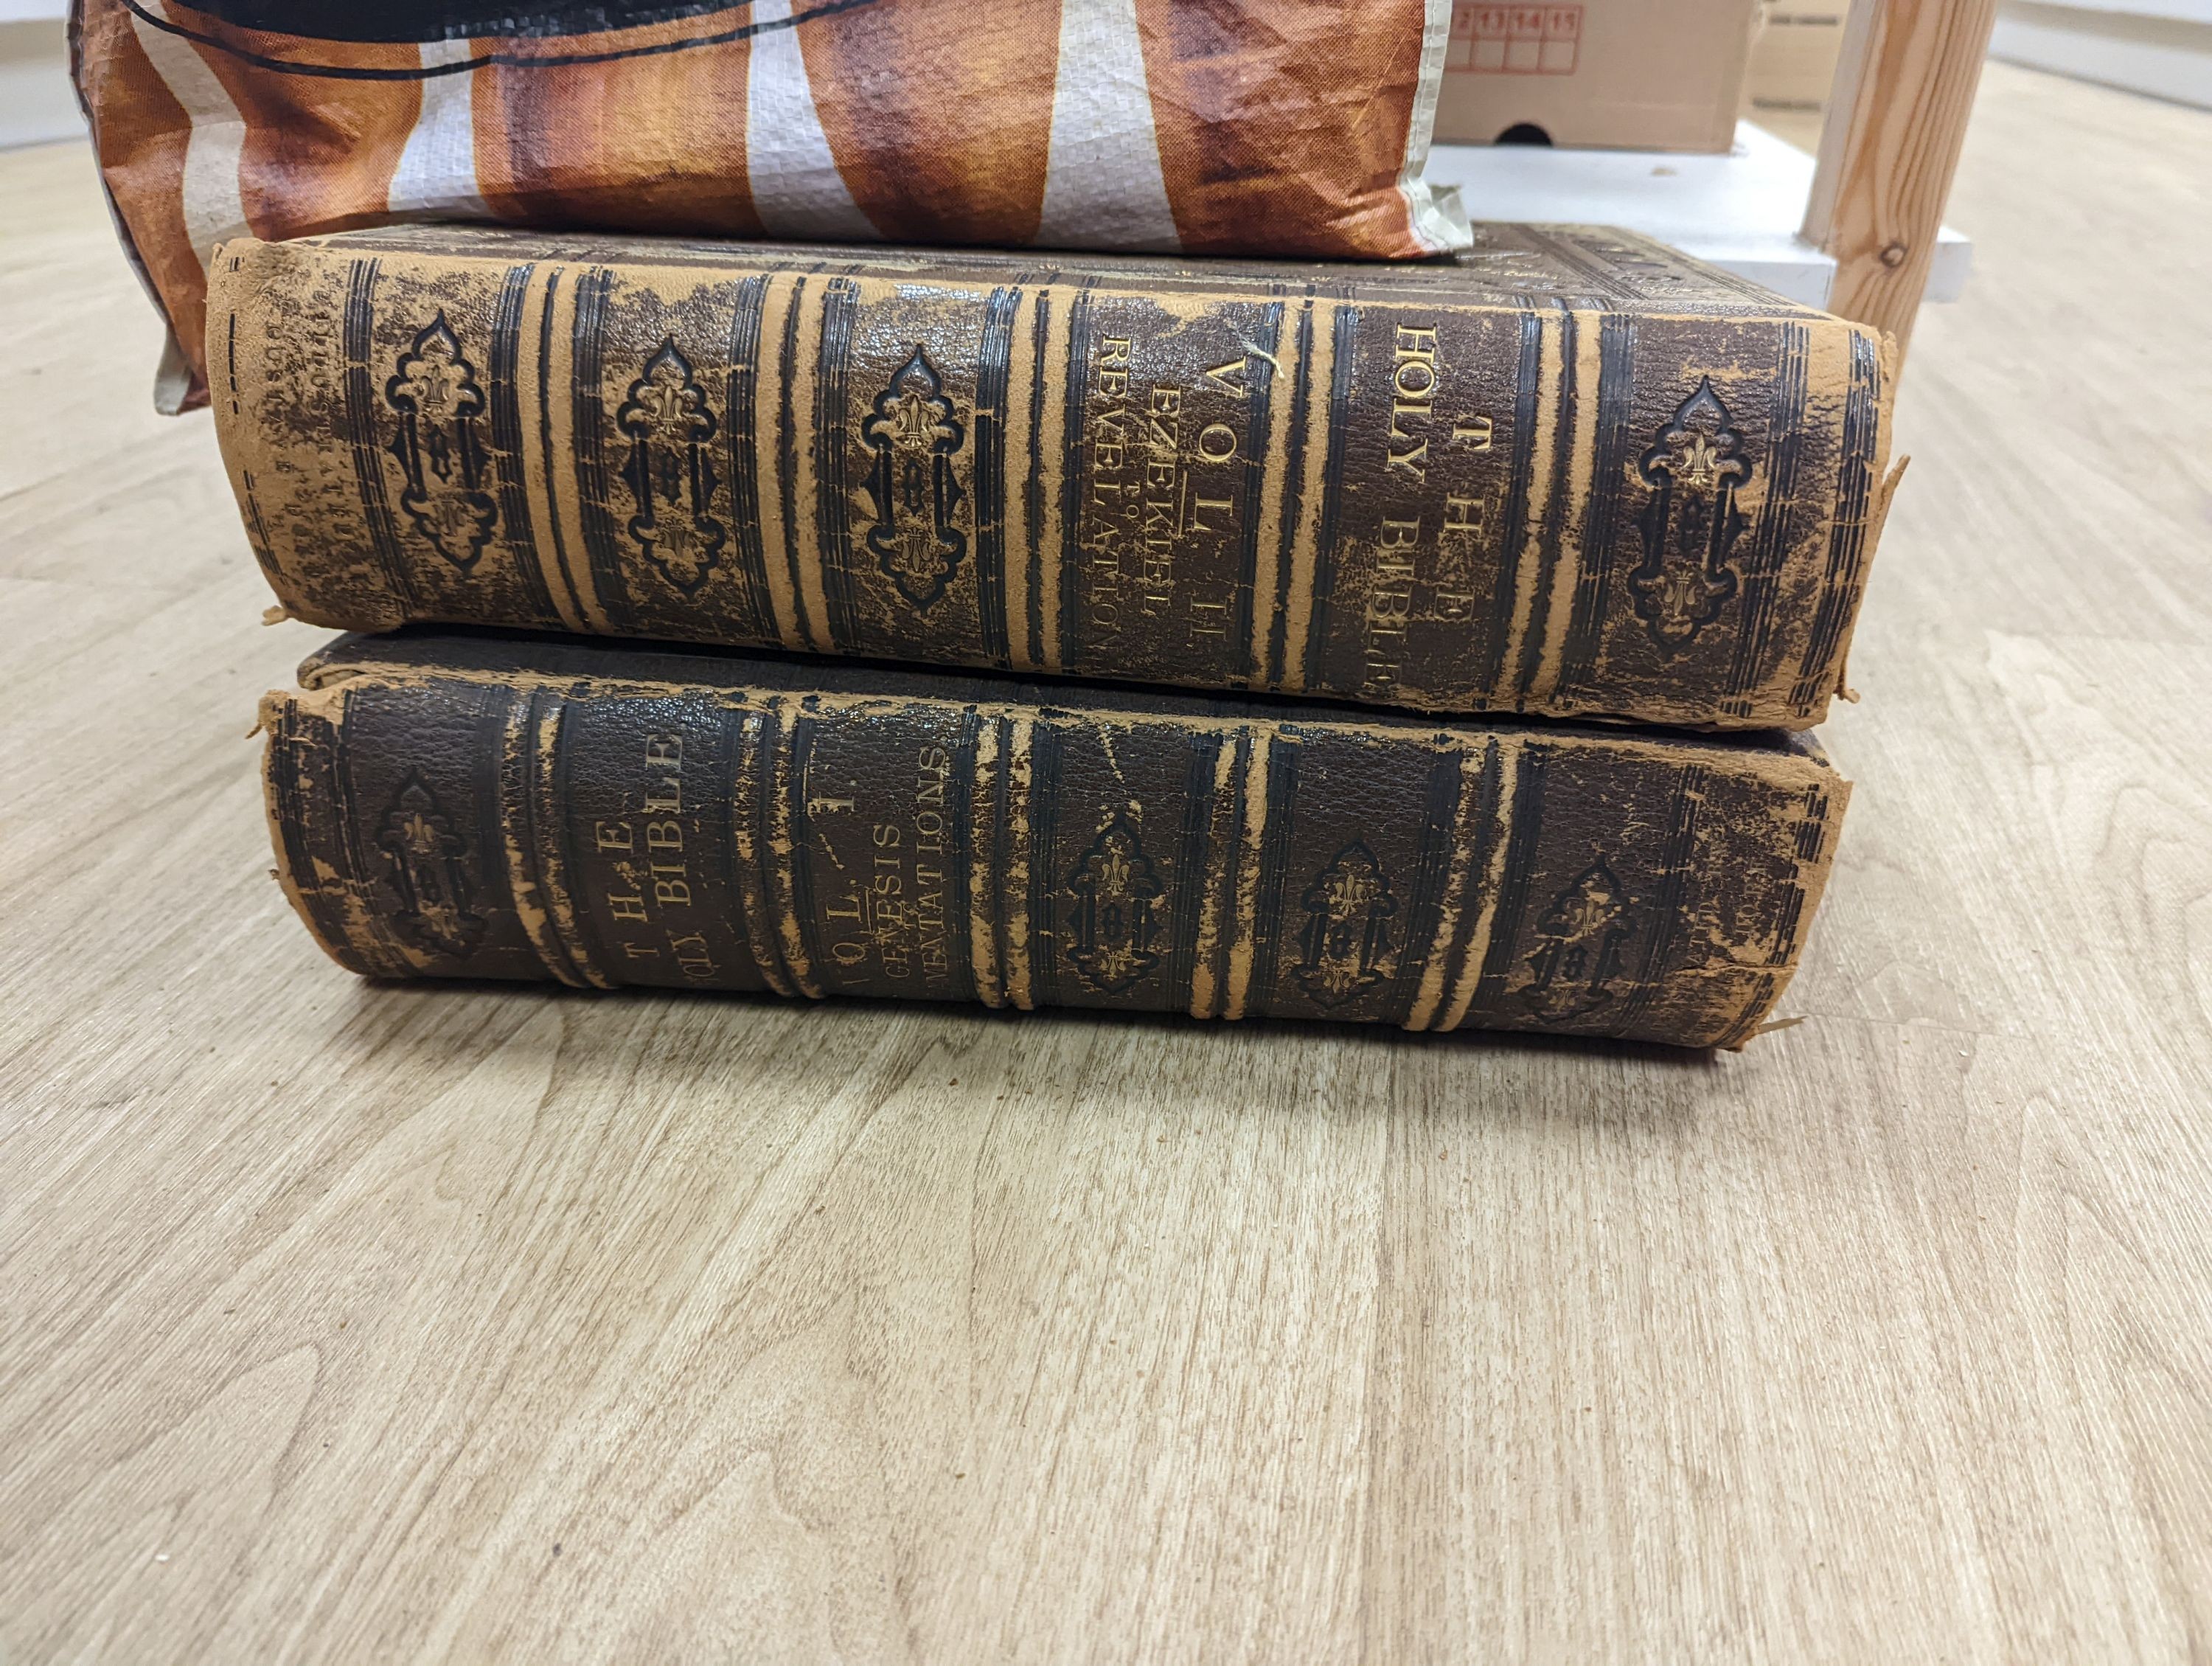 A group of leather bound books and 2 bibles.